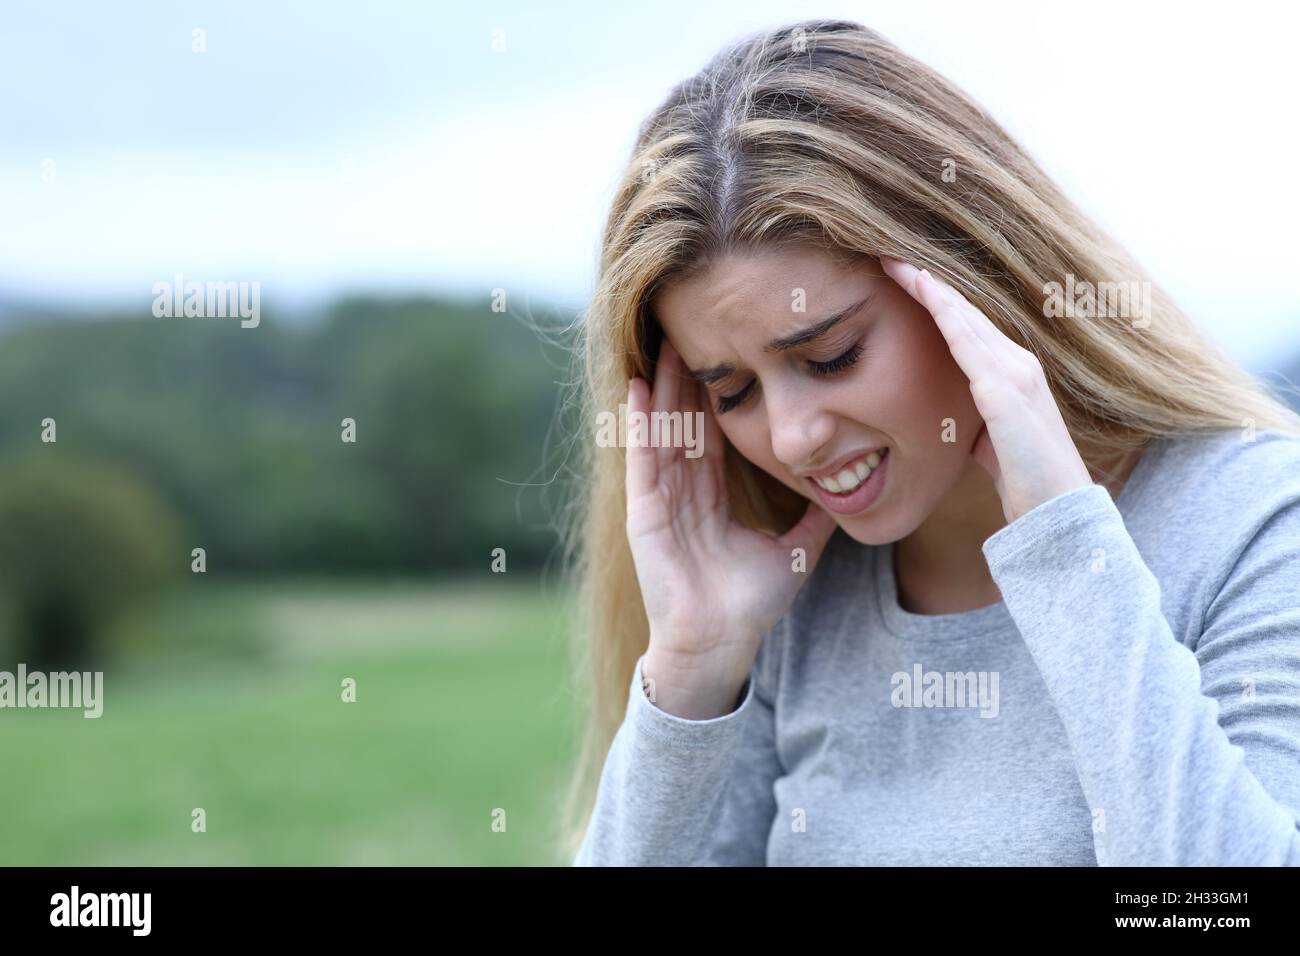 Stressed teen complaining suffering migraine attack in a field Stock Photo